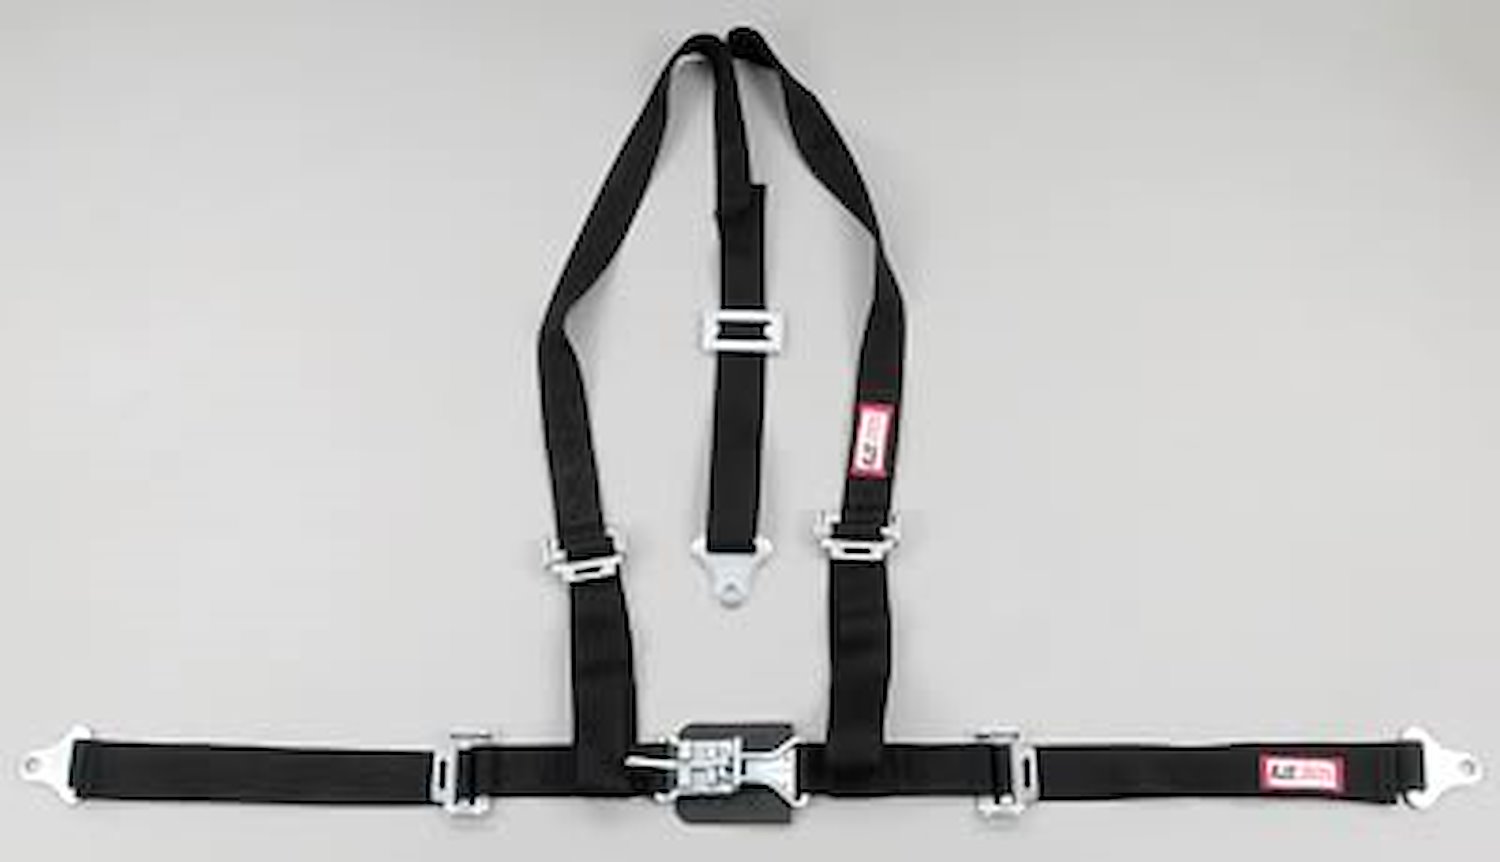 NON-SFI L&L HARNESS 2 PULL UP Lap Belt SEWN IN 2 S.H. Individual ROLL BAR Mount w/STERNUM STRAP ALL WRAP ENDS ORANGE